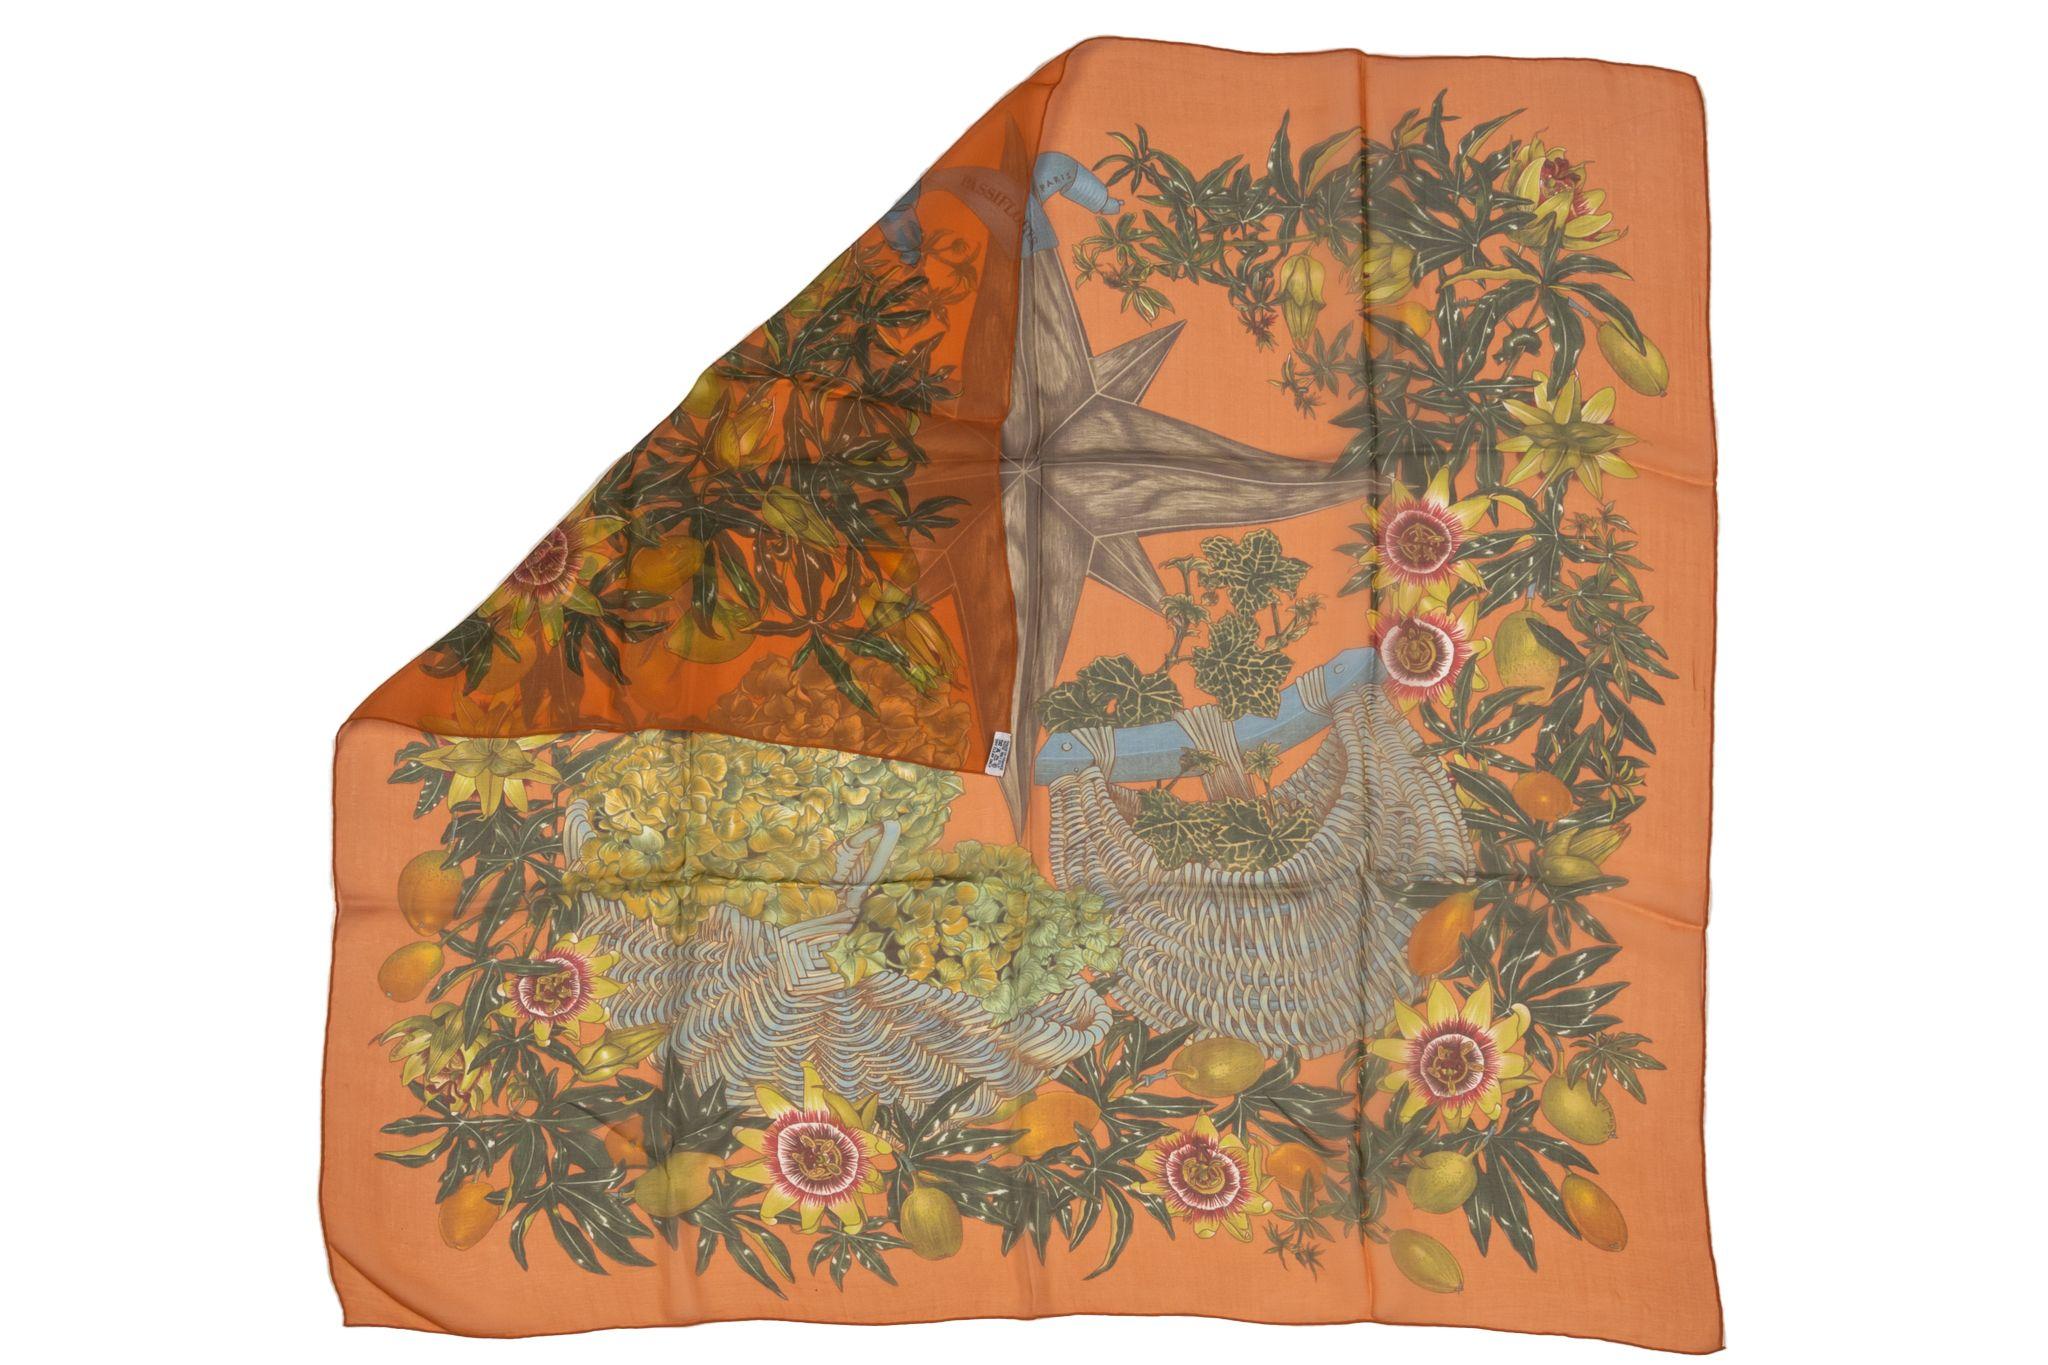 'Passiflores' is a famous floral themed design for Hermes, by Valerie Dawlat-Dumoulin. Designed in 1996, the rich colours and detailed design have made this a very collectable scarf over the years. Item is in excellent condition.